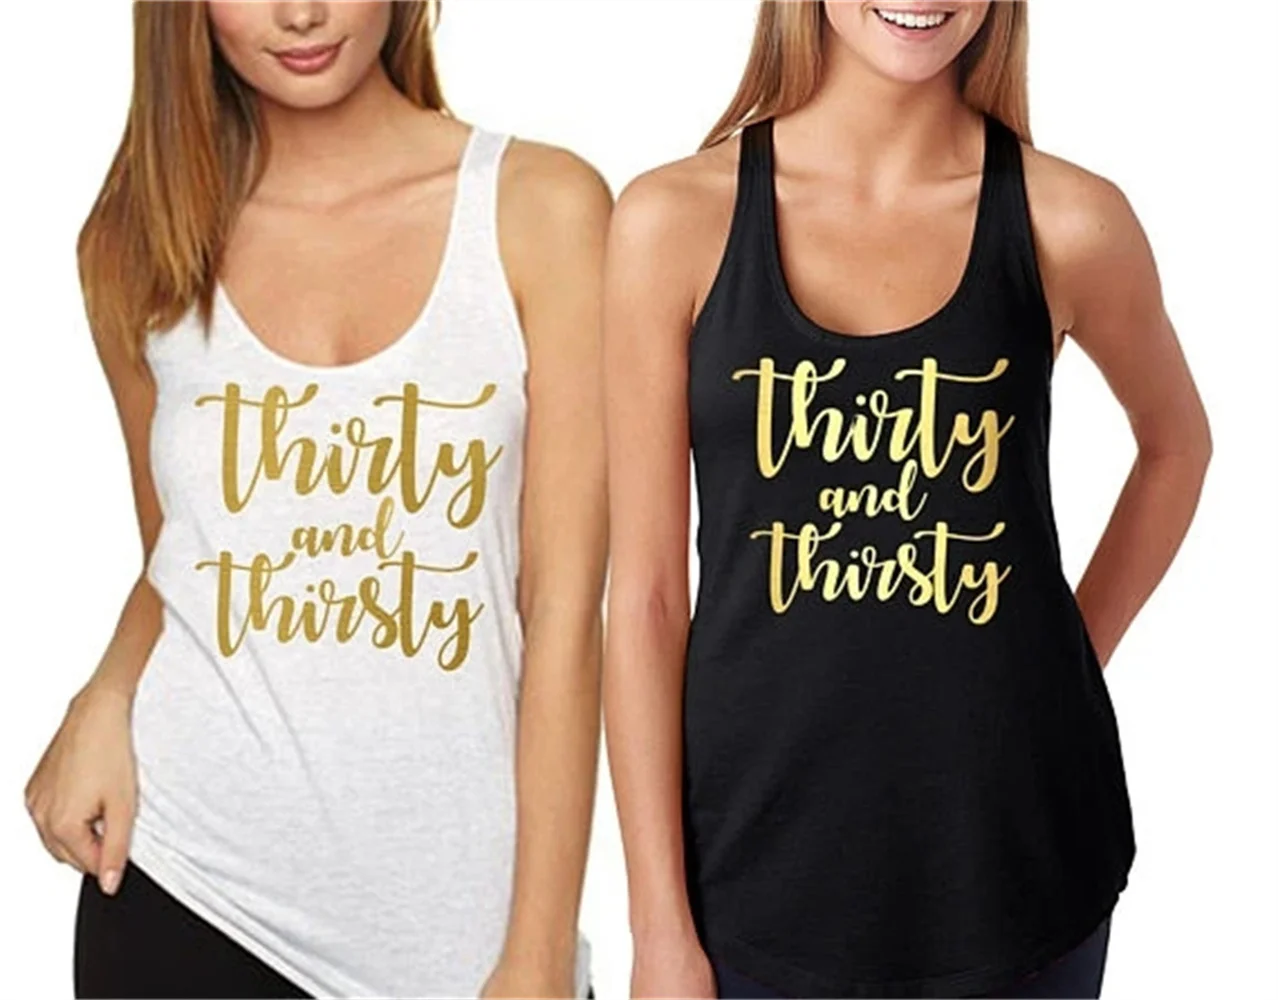 

Personalized Text Thirty And Thirsty Birthday Party Tank Tops Tees Forty Squad Bachelorette t Shirts Party Favors Gifts